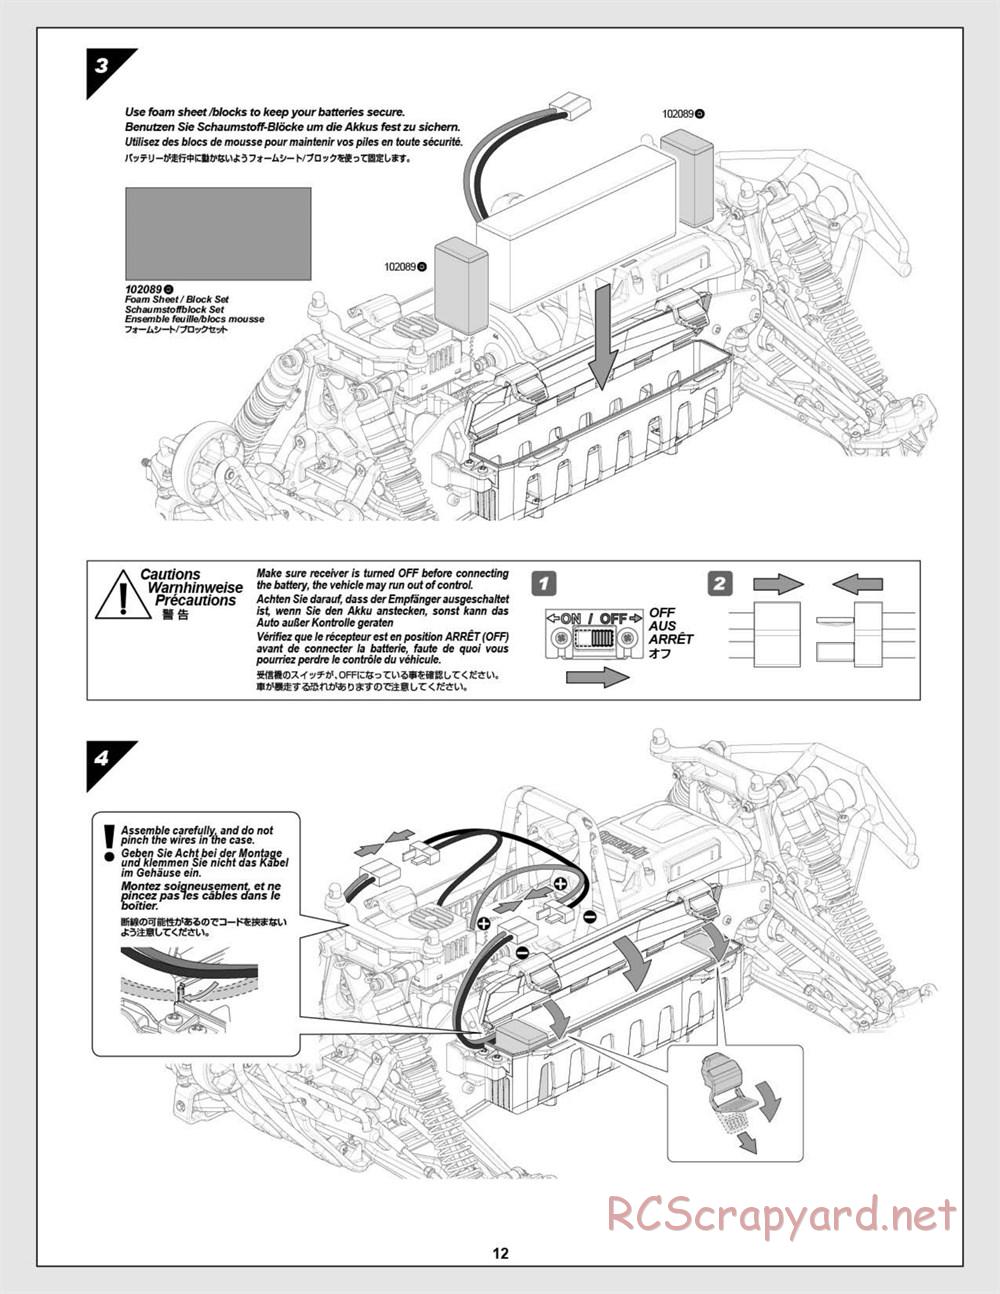 HPI - Savage Flux HP - Manual - Page 12